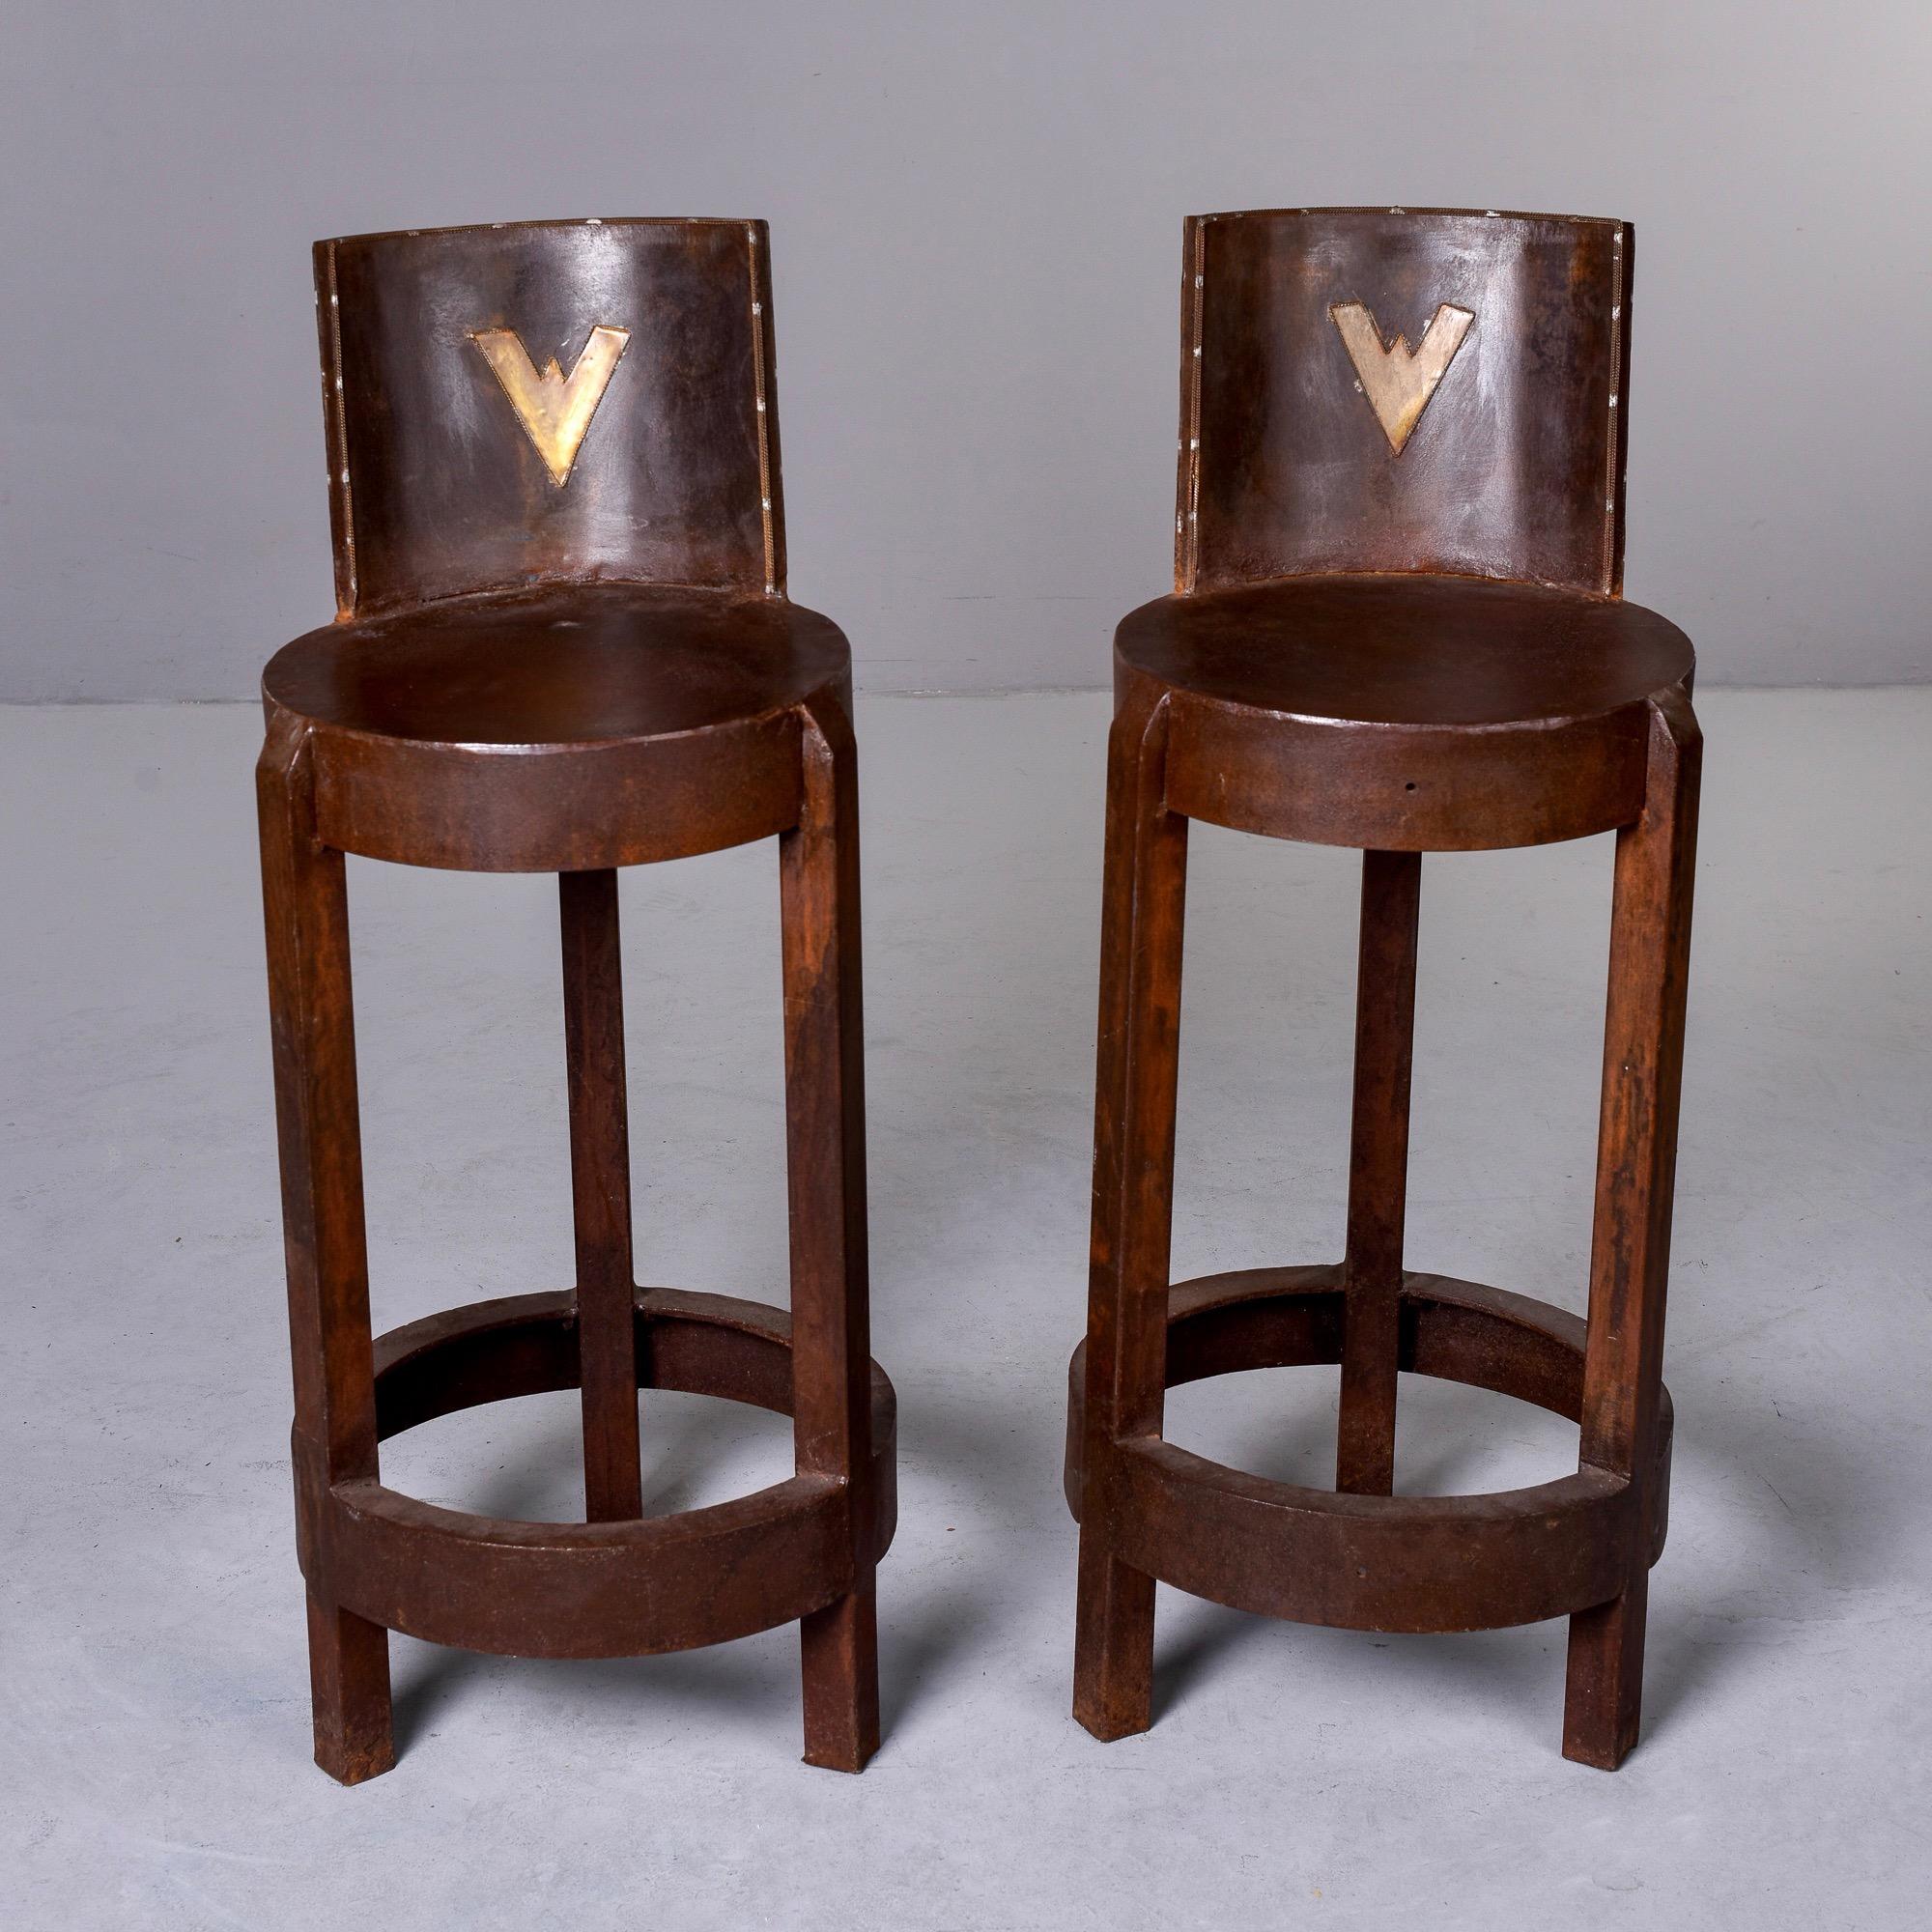 Circa 1980s pair of industrial style bar height stools from Norway. These three legged tools are made of iron with rust colored finish - note - this is not a rusted finish but a rust colored finish. Round seats are 29.5” from floor. Foot rests at